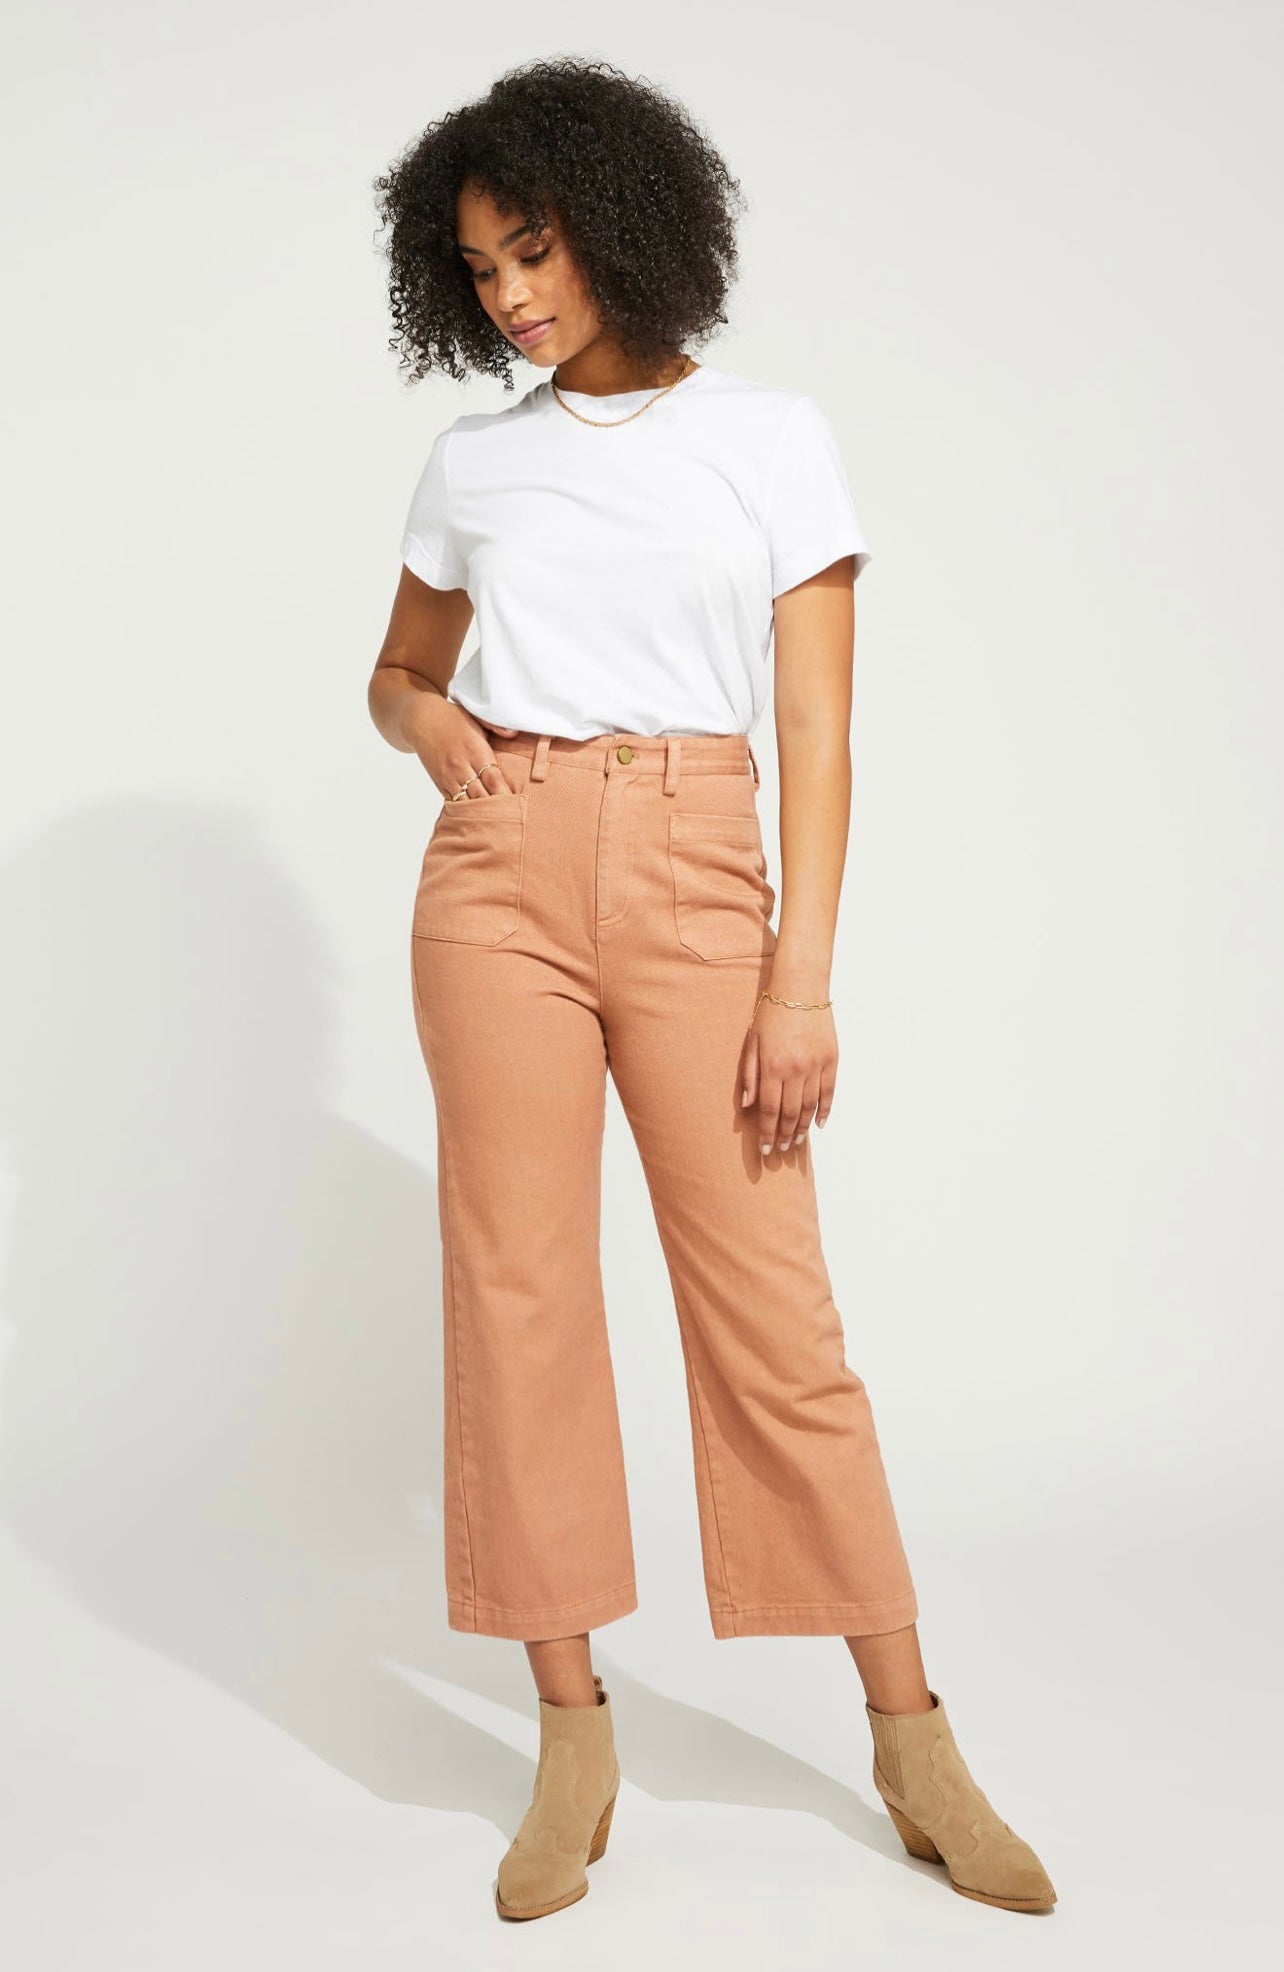 Gentle Fawn - Bianca Pant